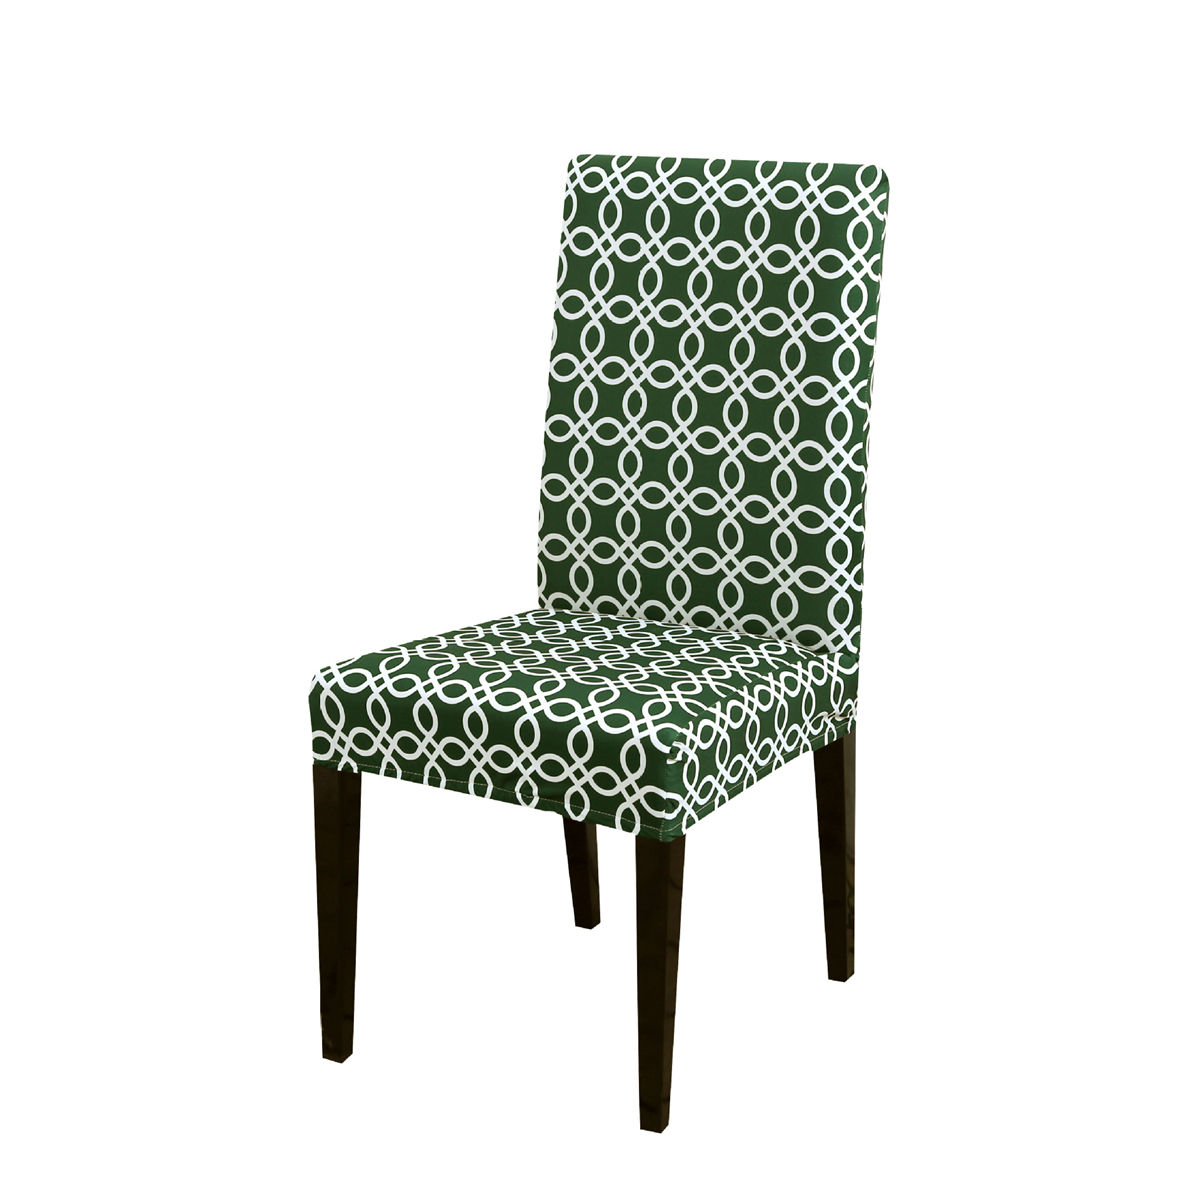 Elastic-Dining-Chair-Cover-Stain-resistant-Geometry-Printing-Seat-Chair-Cover-Spandex-Elastic-Seat-C-1925458-10